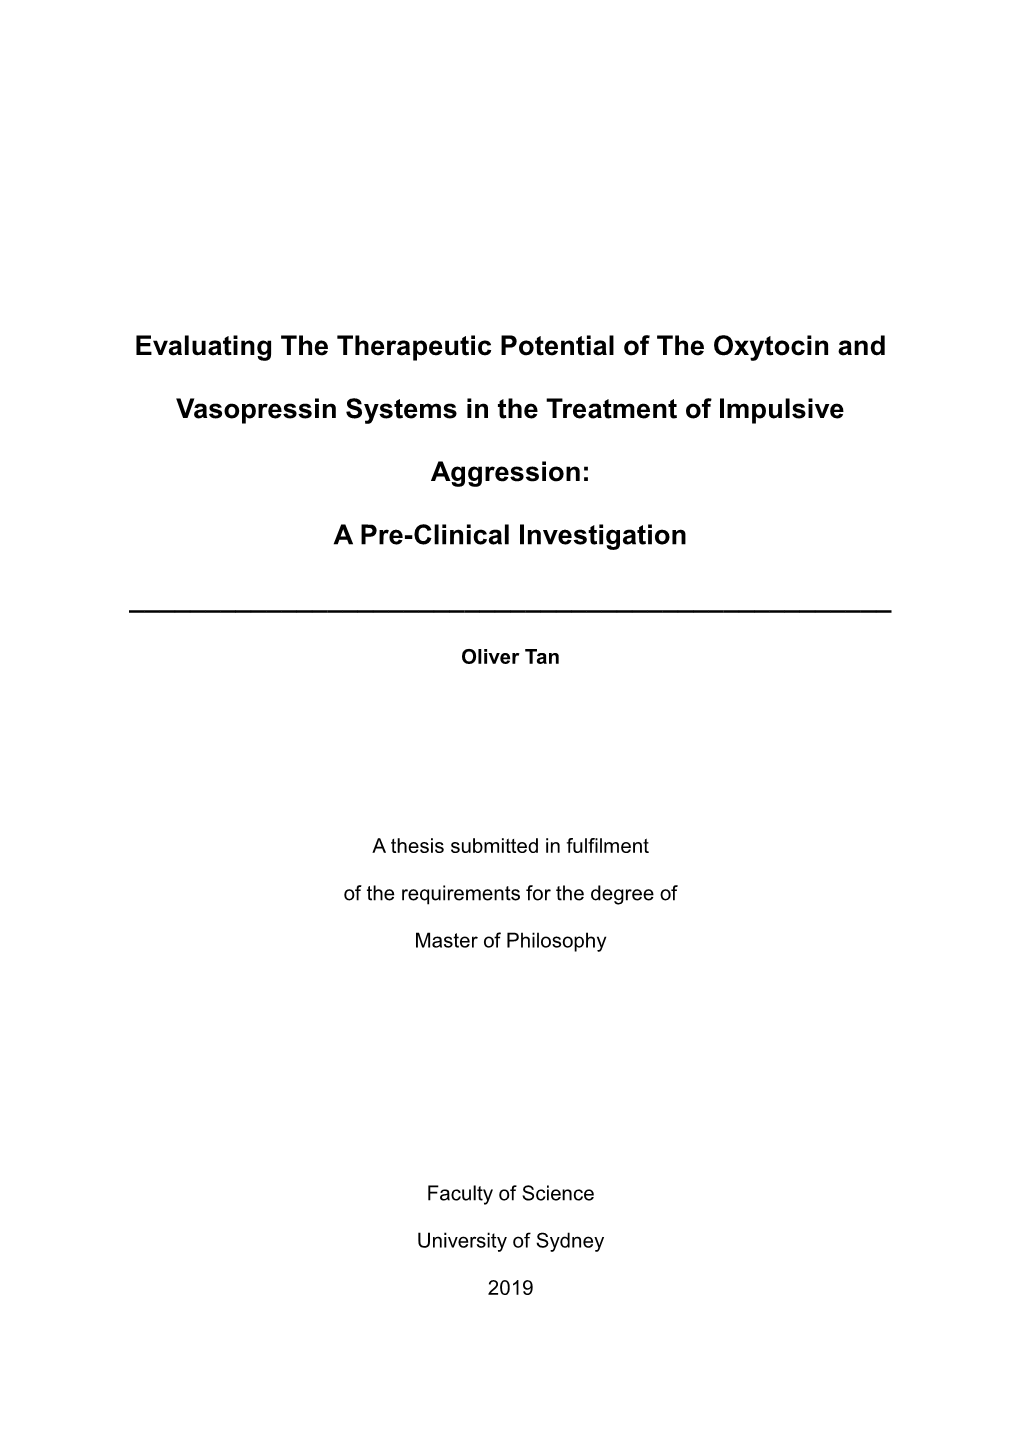 Evaluating the Therapeutic Potential of the Oxytocin and Vasopressin